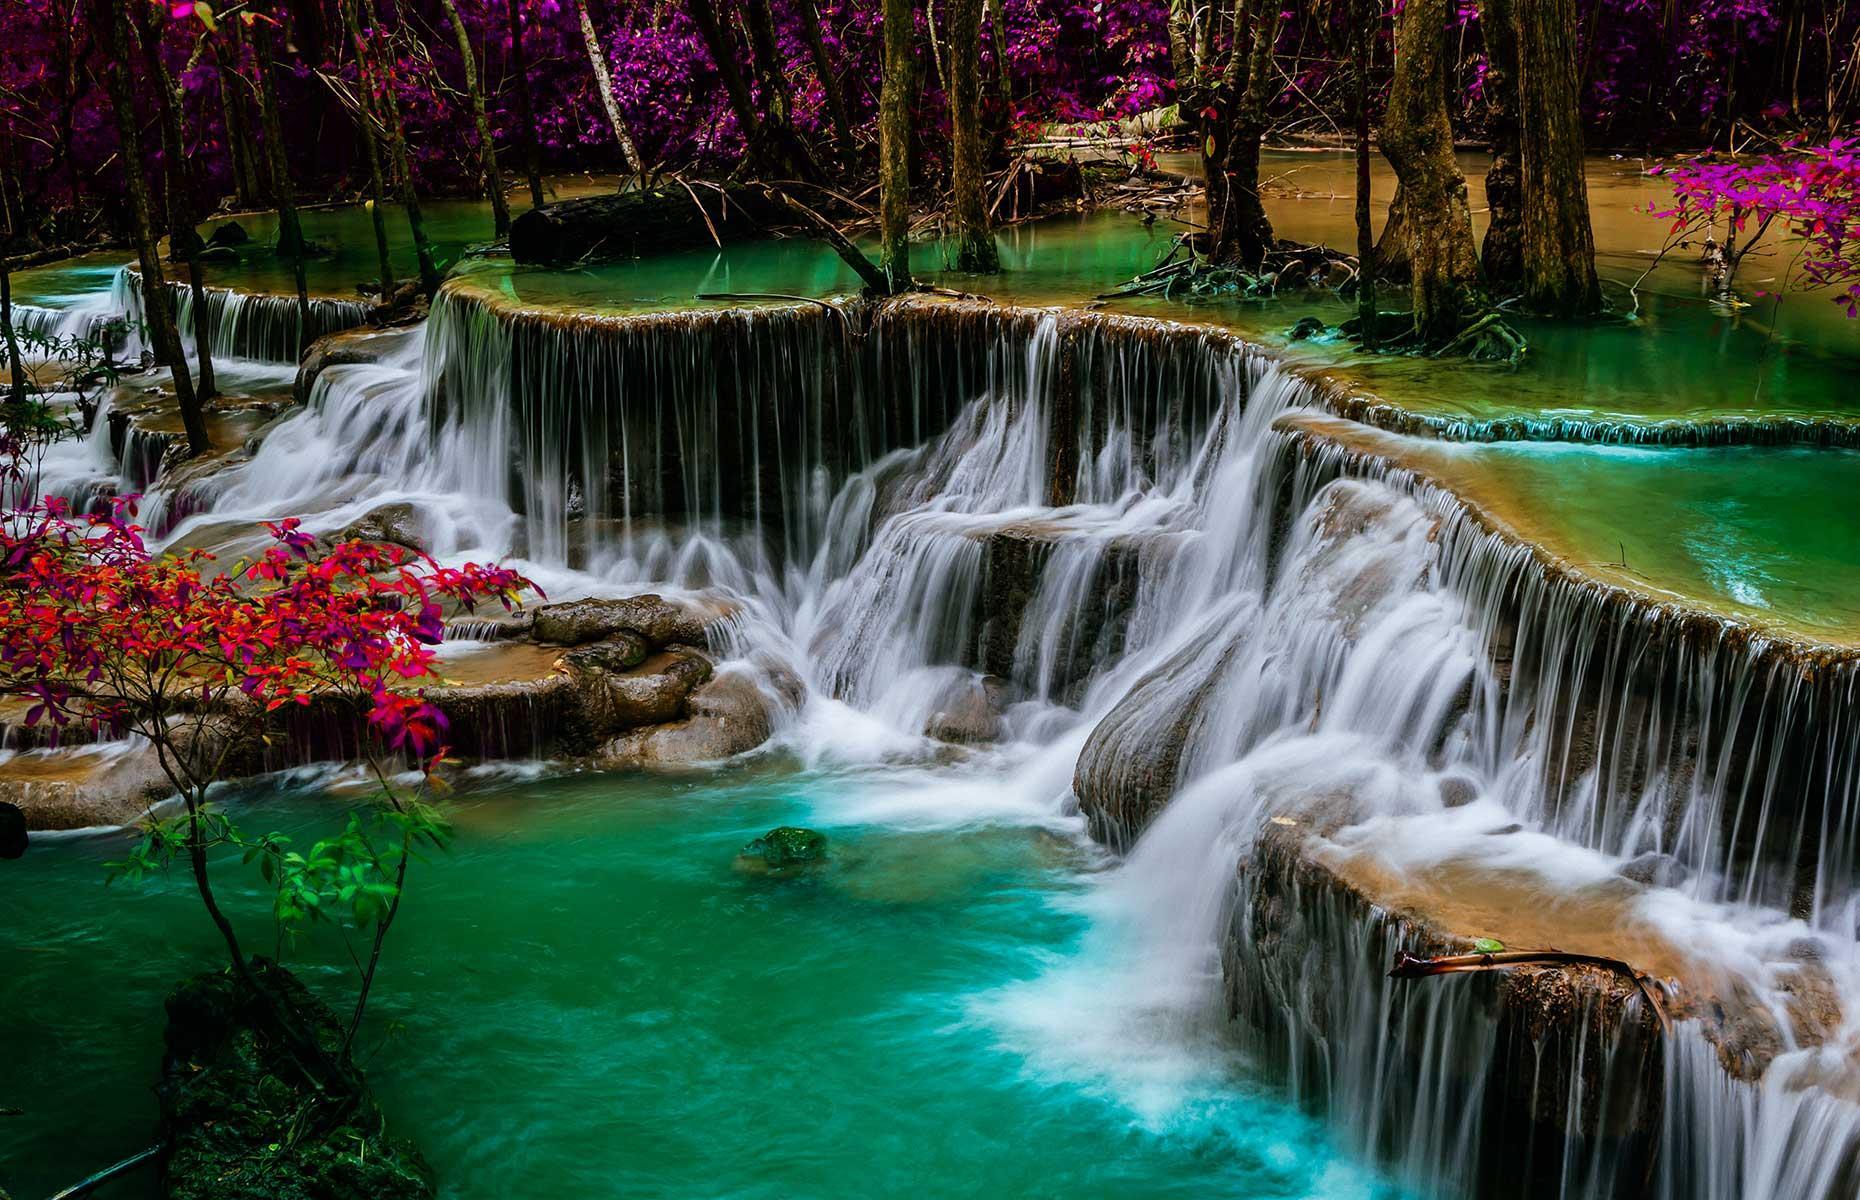 This breathtaking natural wonder is considered one of Thailand's finest waterfalls. Found inside Srinakarin Dam National Park in western Thailand, the tiered fall drops for seven levels and stretches around 1.2 miles (2km). Surrounded by a stunning jungle landscape, this scenic chain of waterfalls is especially picturesque in fall.